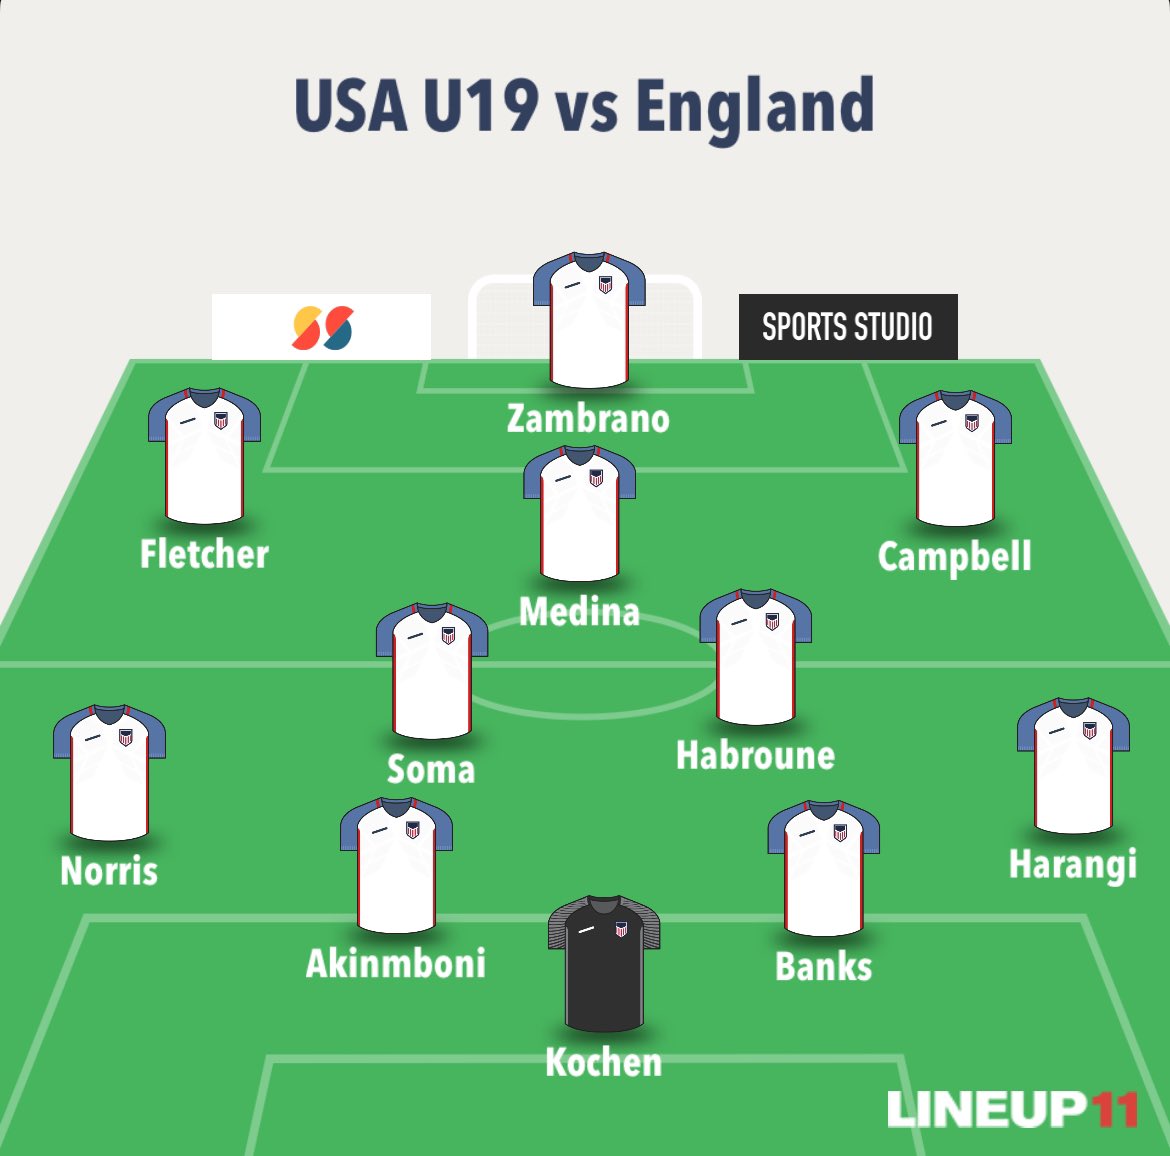 Here's how the USA U19s lineup against England's U19s.

#USMNT #USYNT #YoungLions #ThreeLions